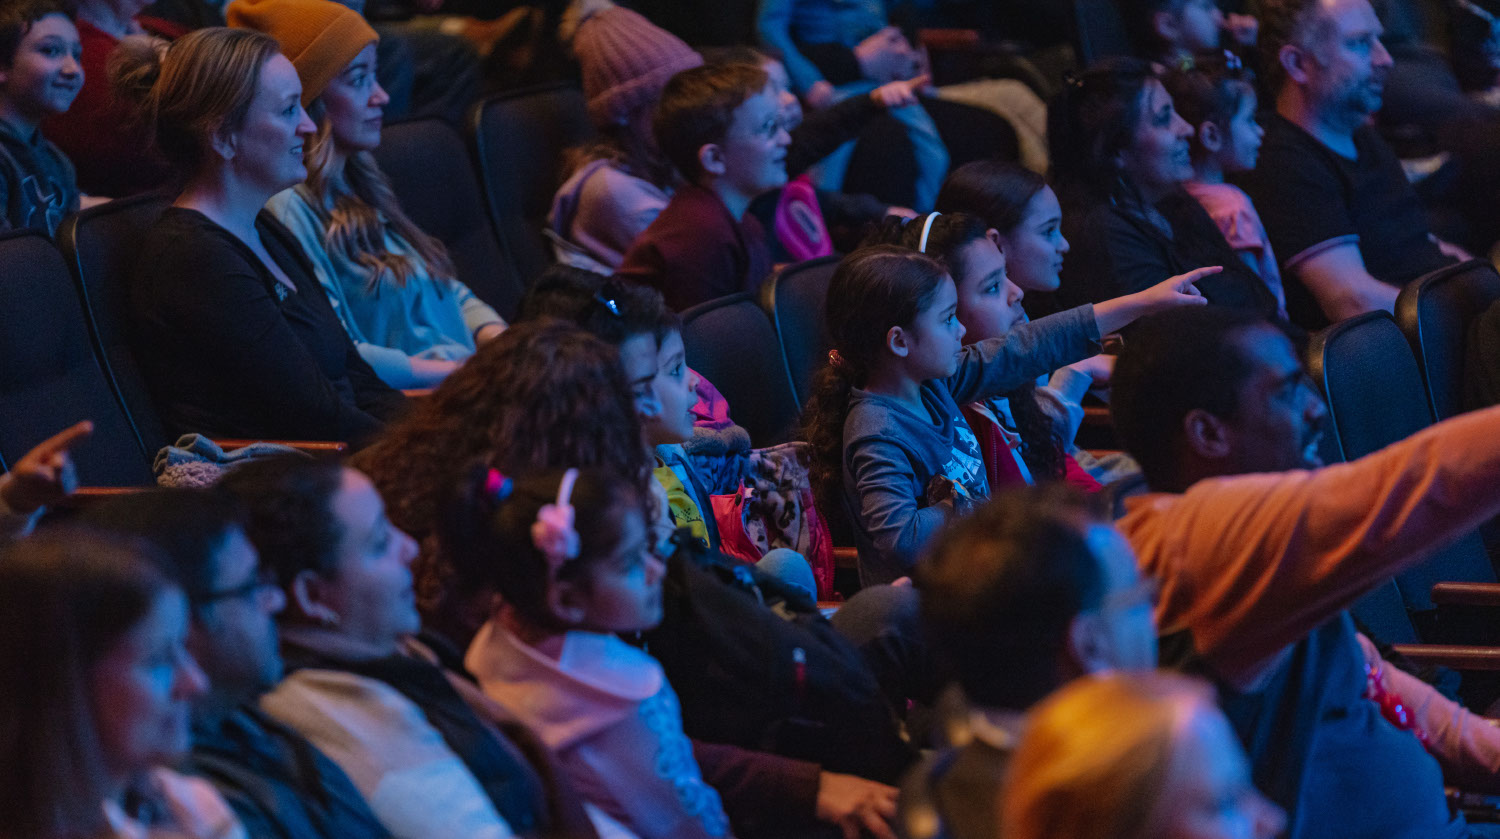 An image of a dimly lit theater with audiences of all ages seated, looking ahead and smiling. One child points forward.